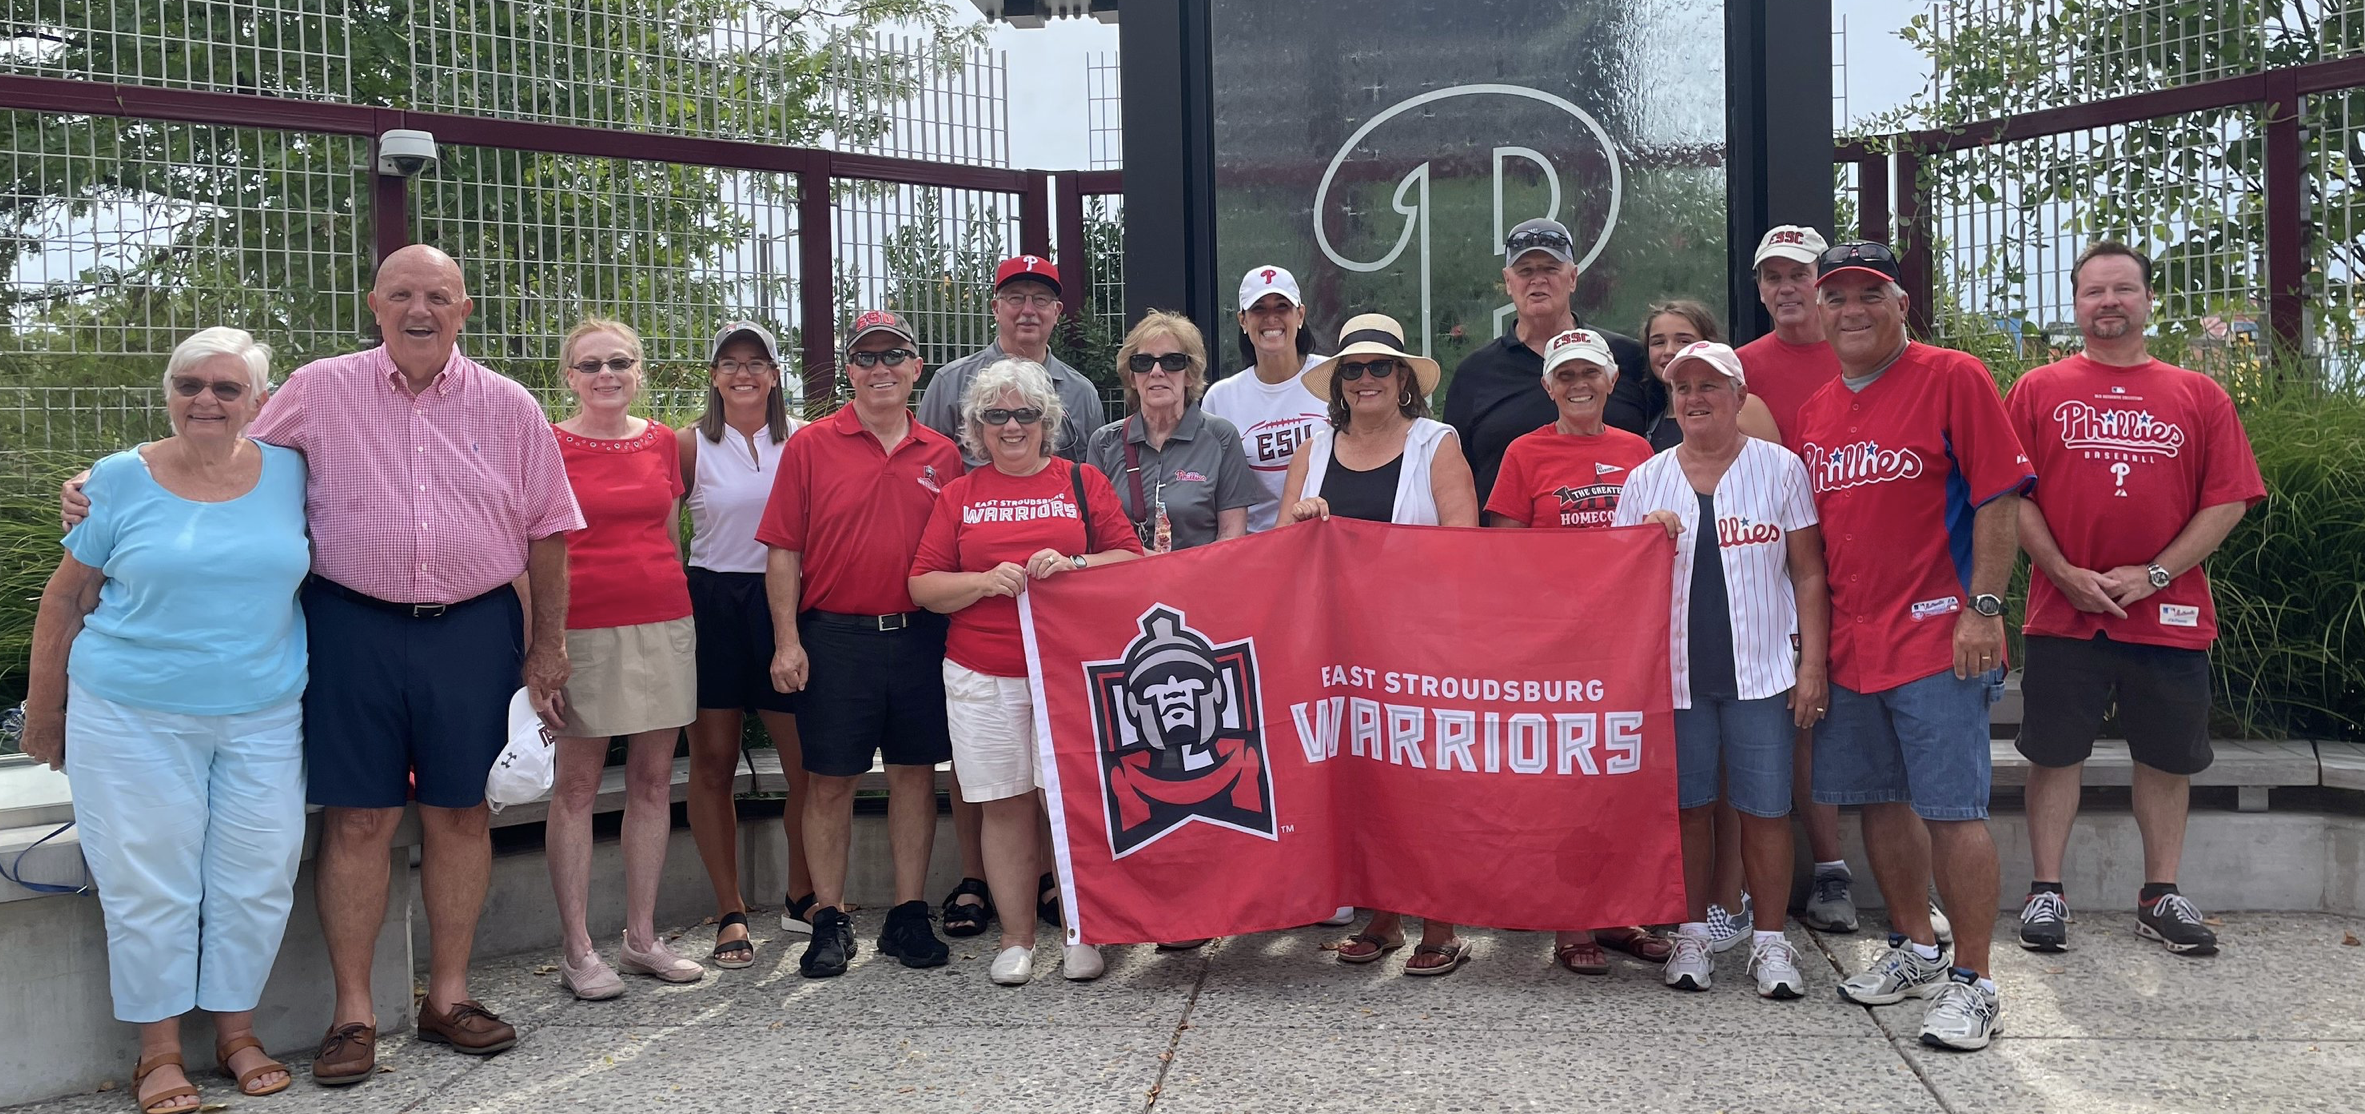  Alumni and friends gather for a Philadelphia Phillies game